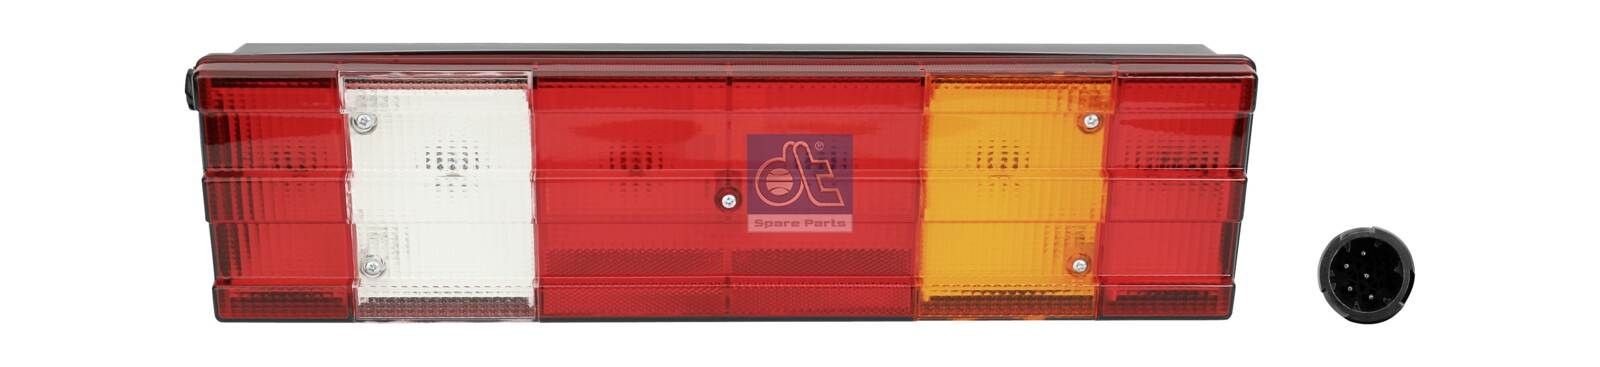 2VP 007 500-521 DT Spare Parts Right, P21W, P21W, R10W, 24V, with bulbs, with back-up alarm Tail light 4.62382 buy